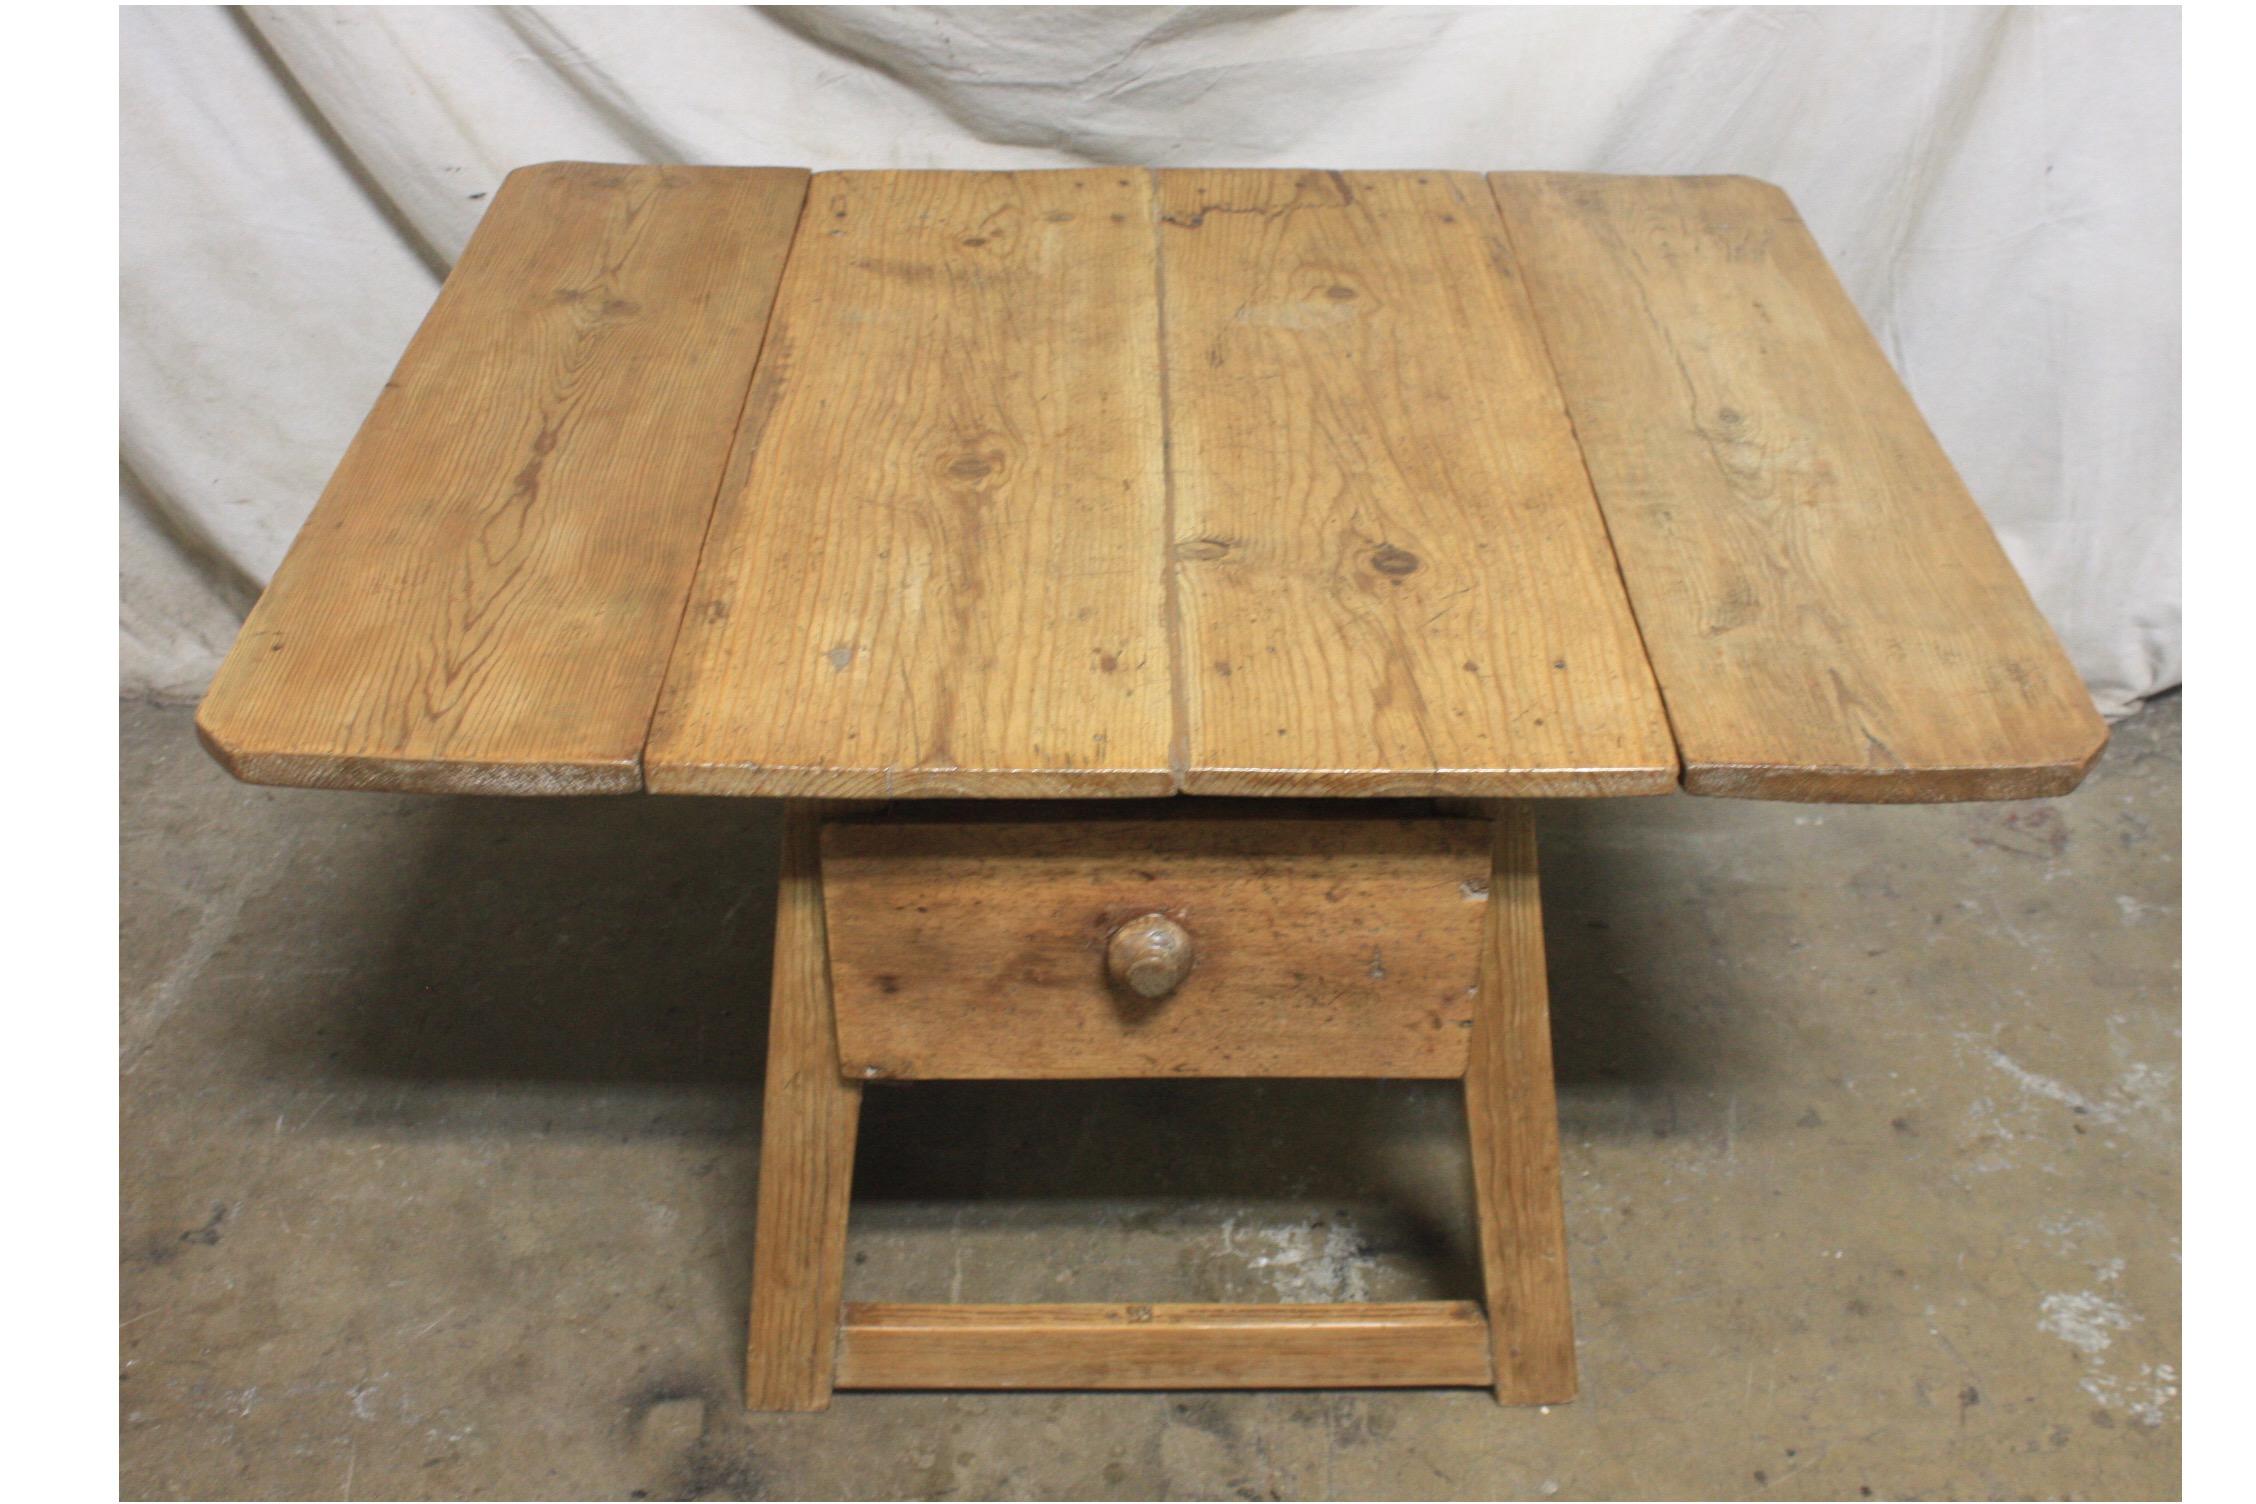 18th century French primitive table.